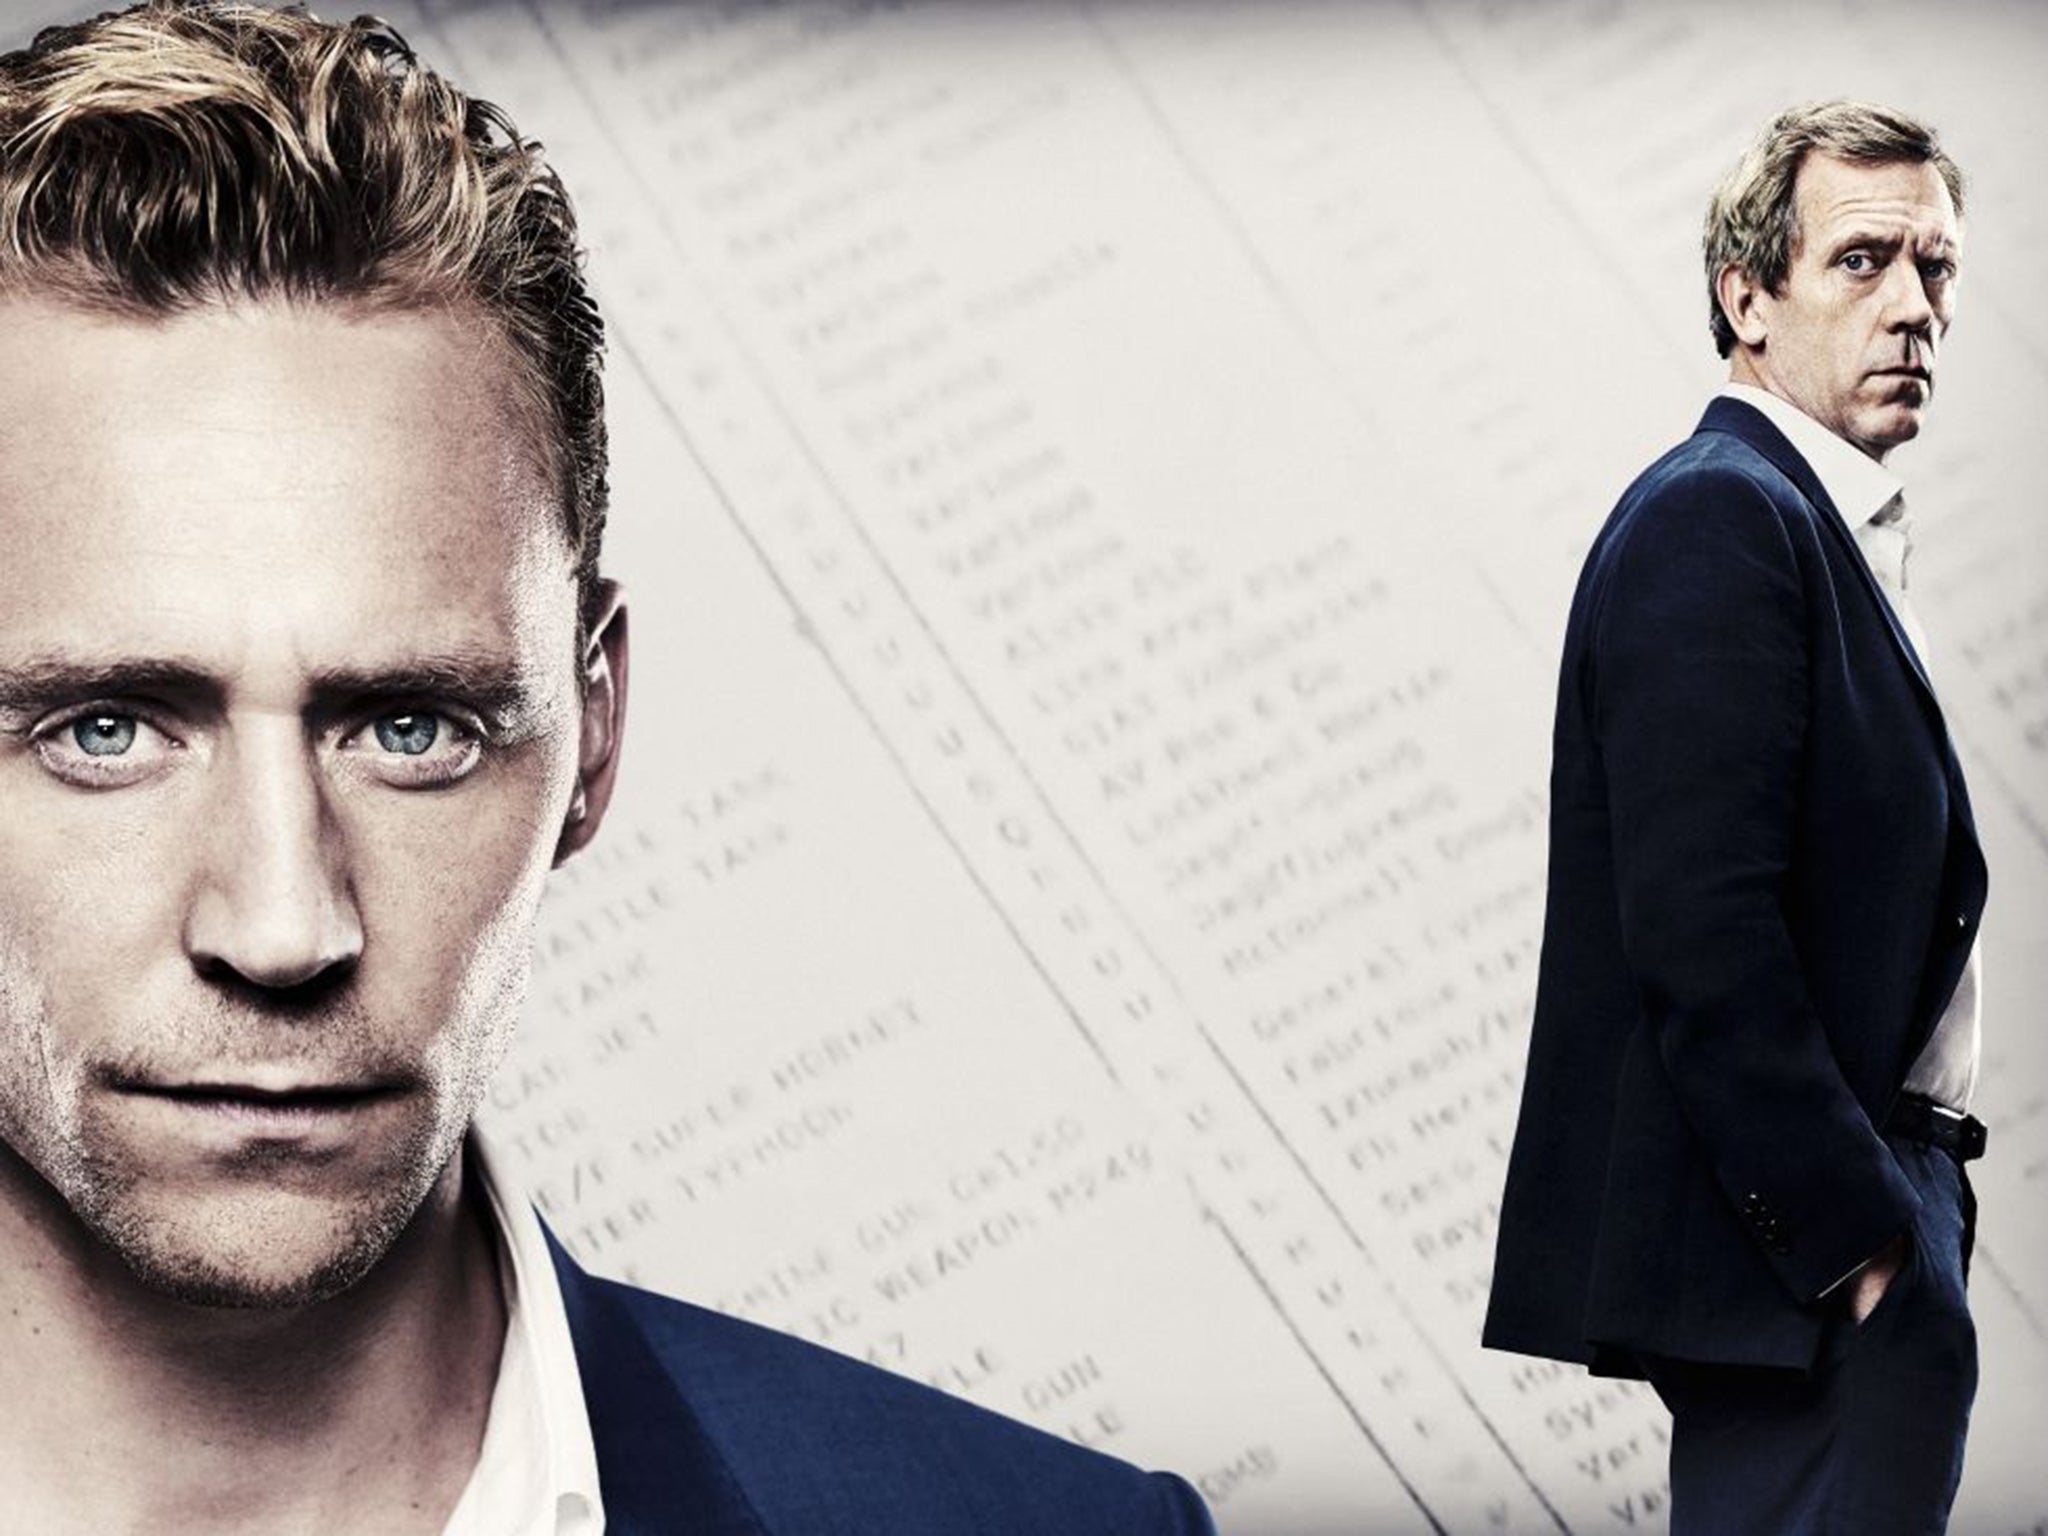 Tom Hiddleston and Hugh Lawrie star in The Night Manager